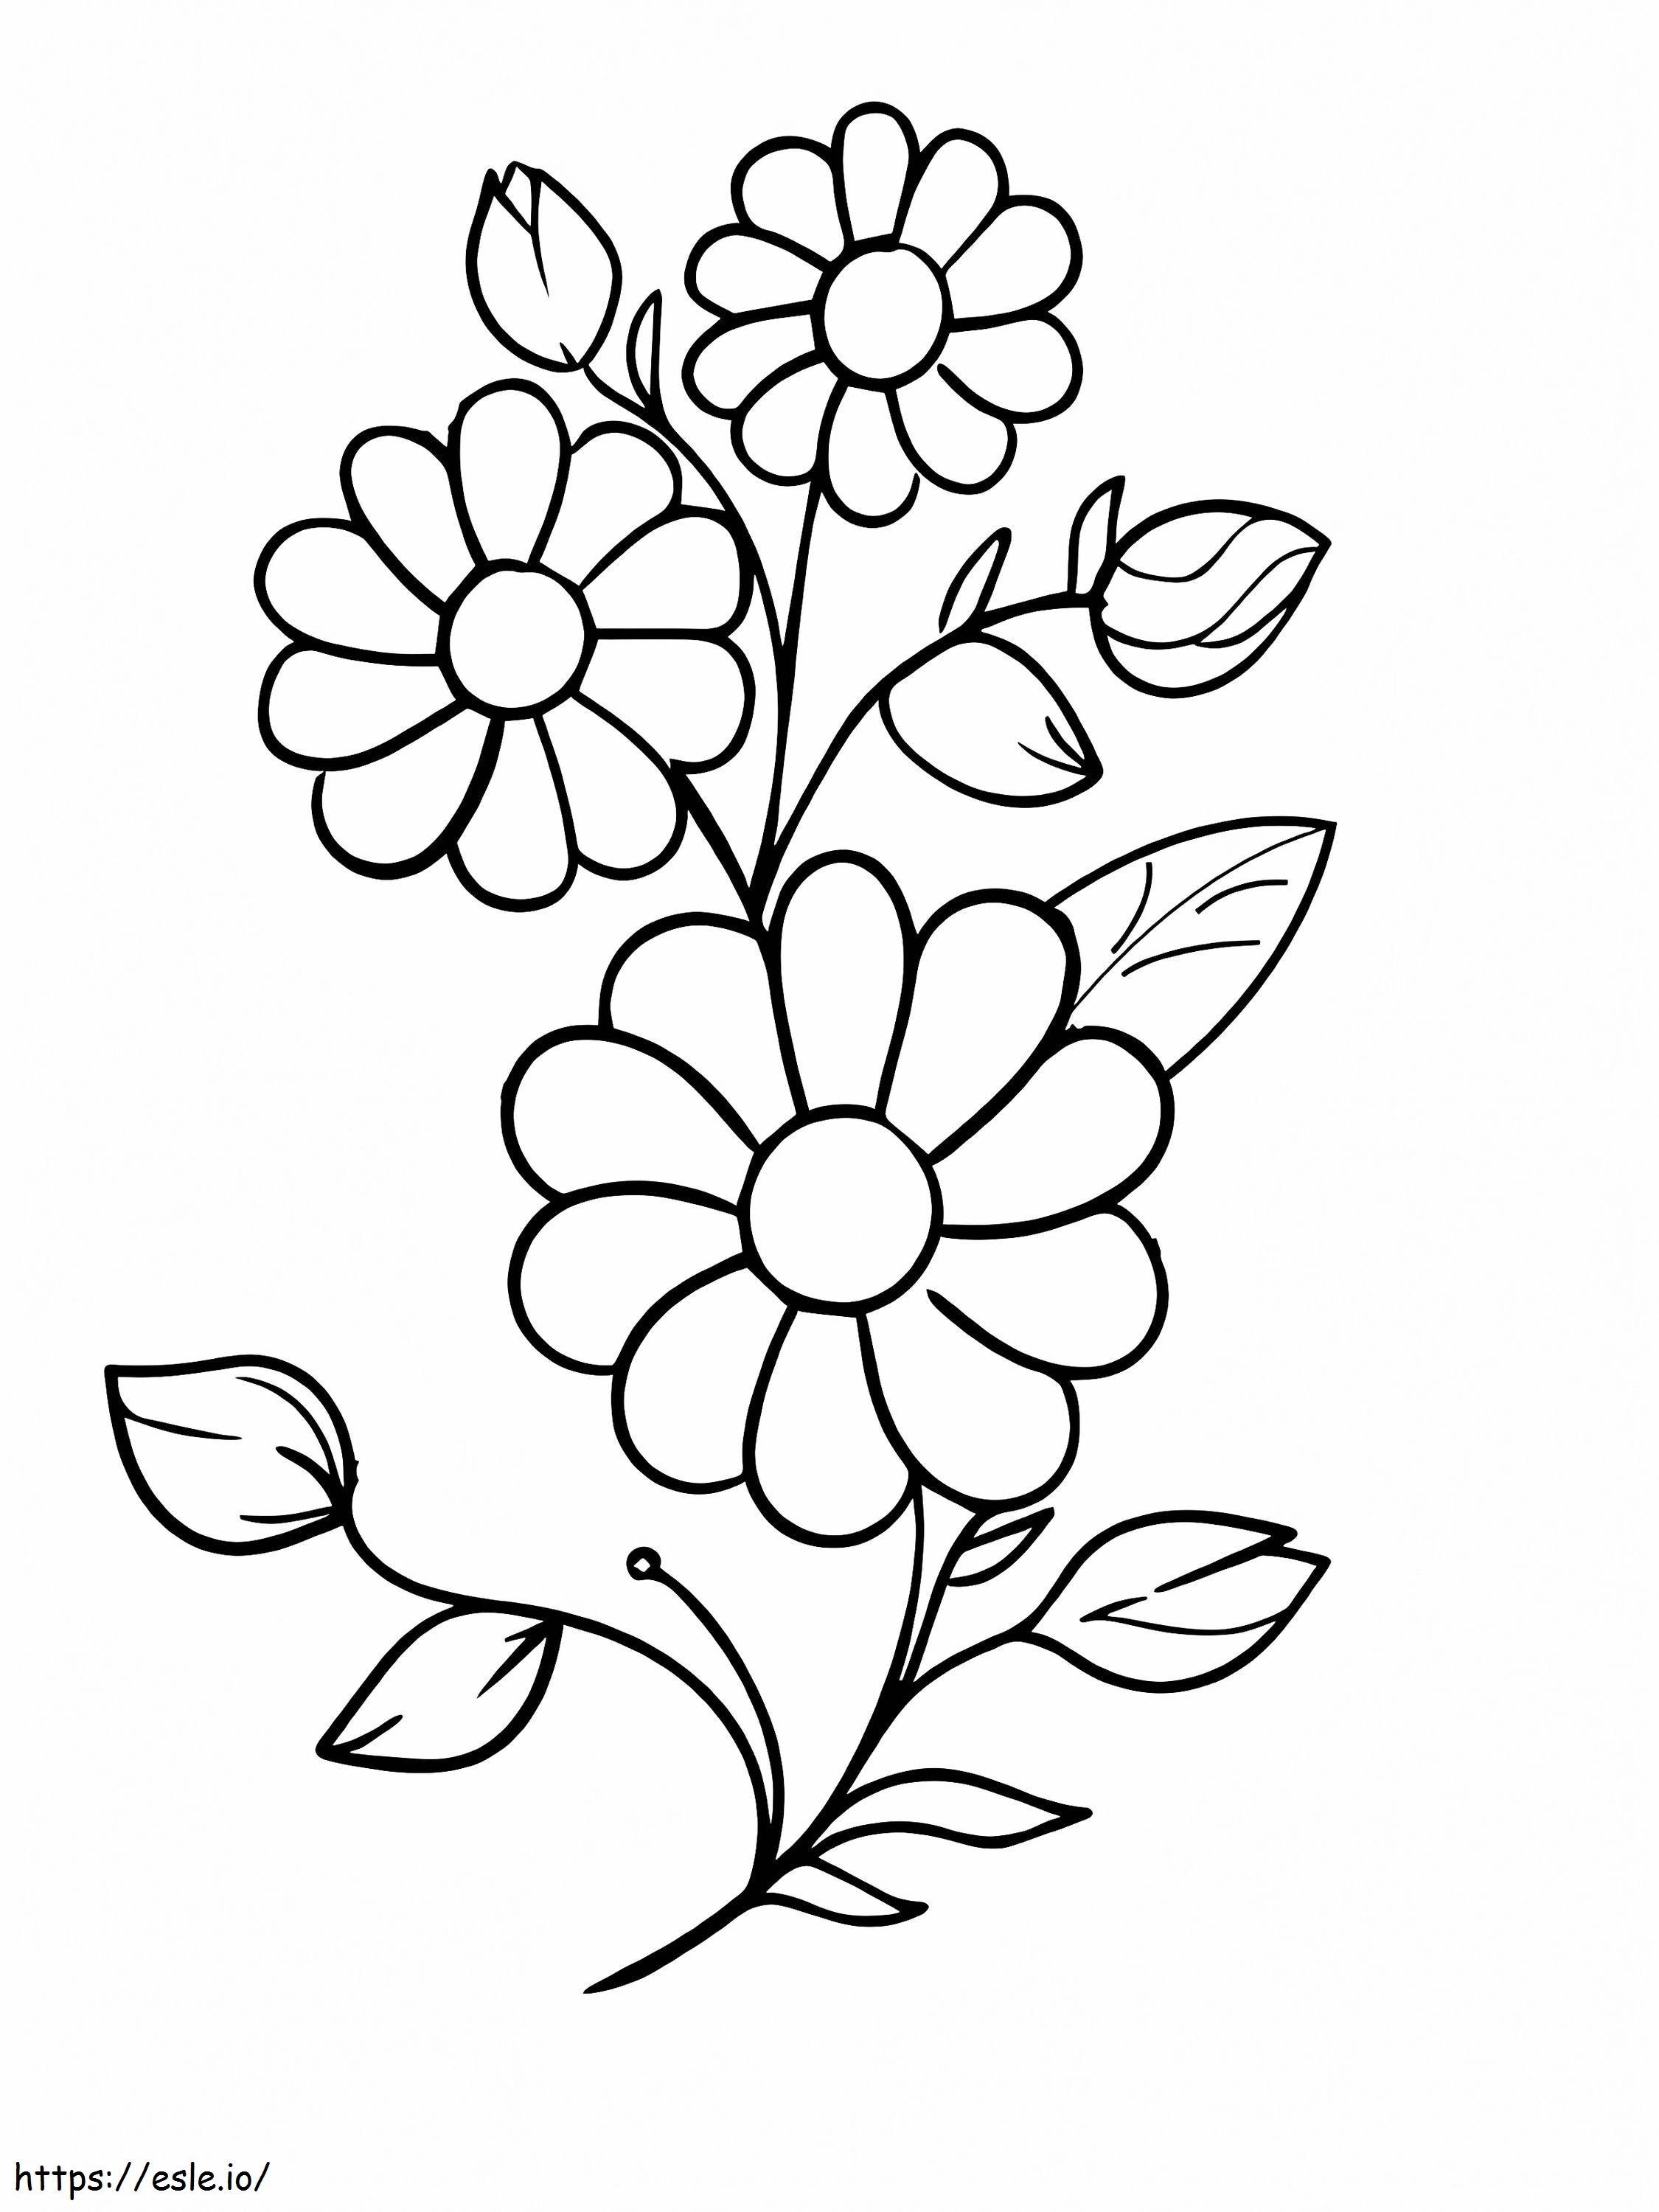 Aesthetic Flowers coloring page